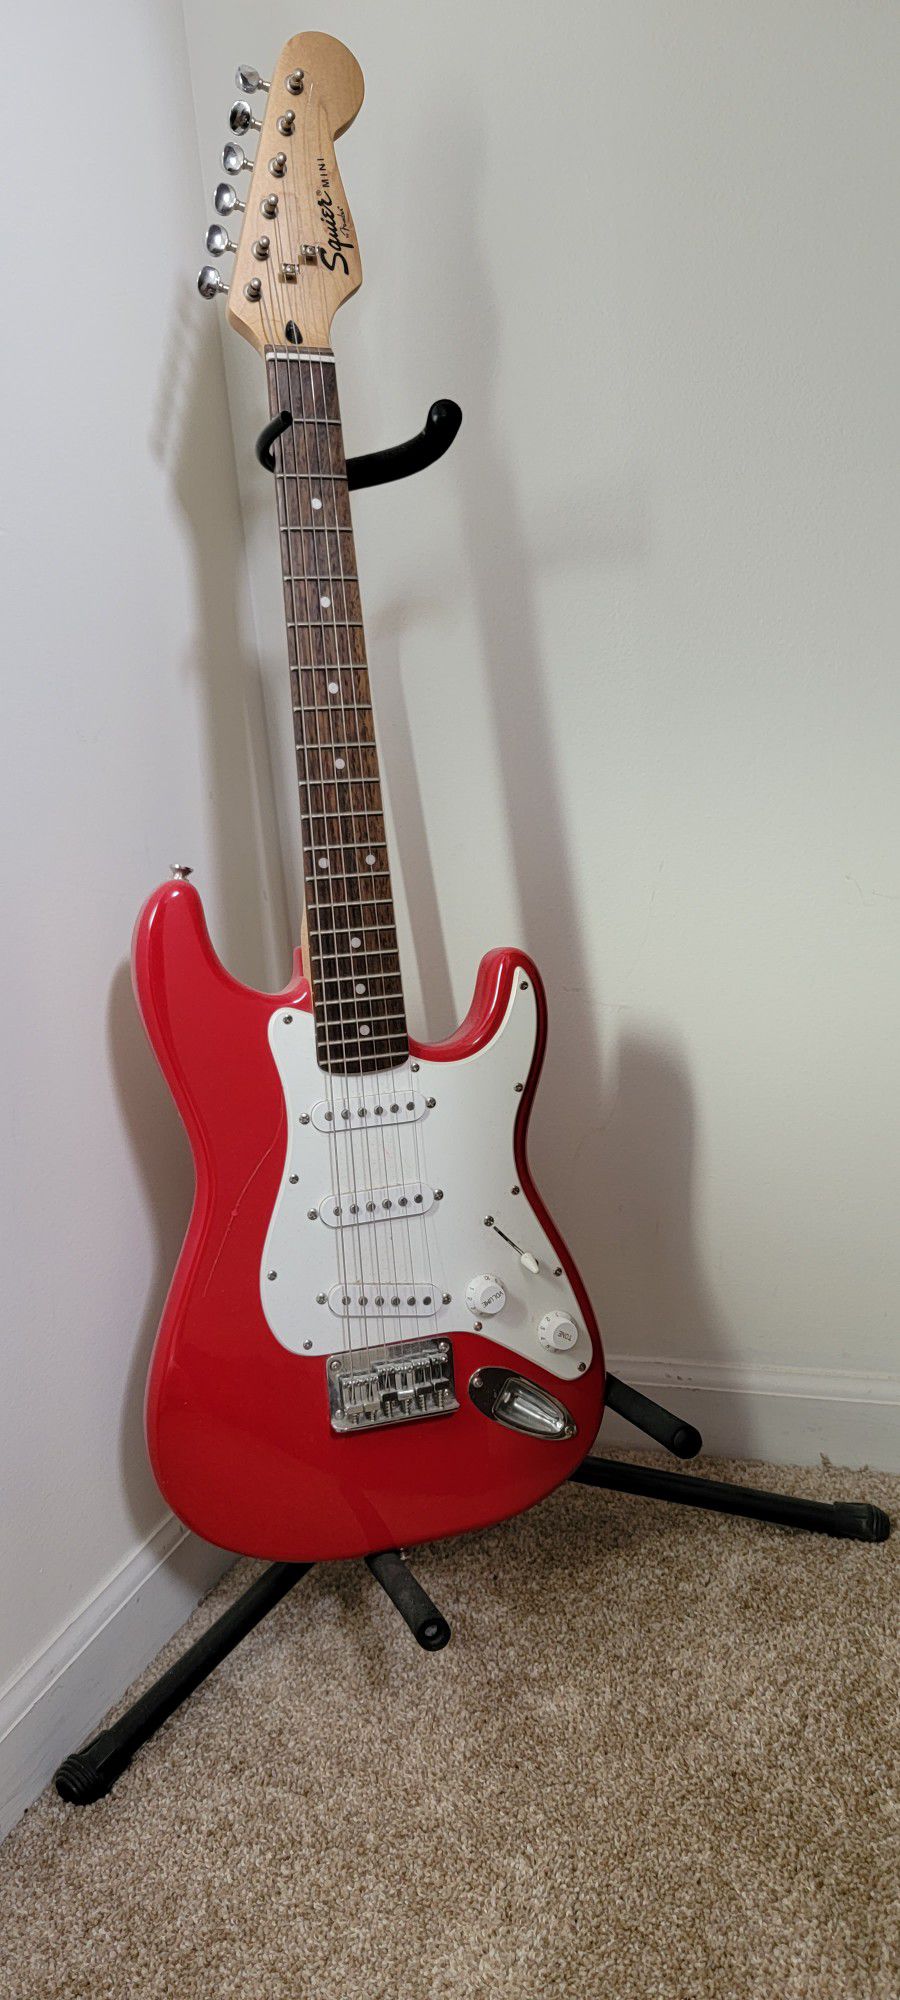 Squier Mini Electric Guitar

W/ Stand